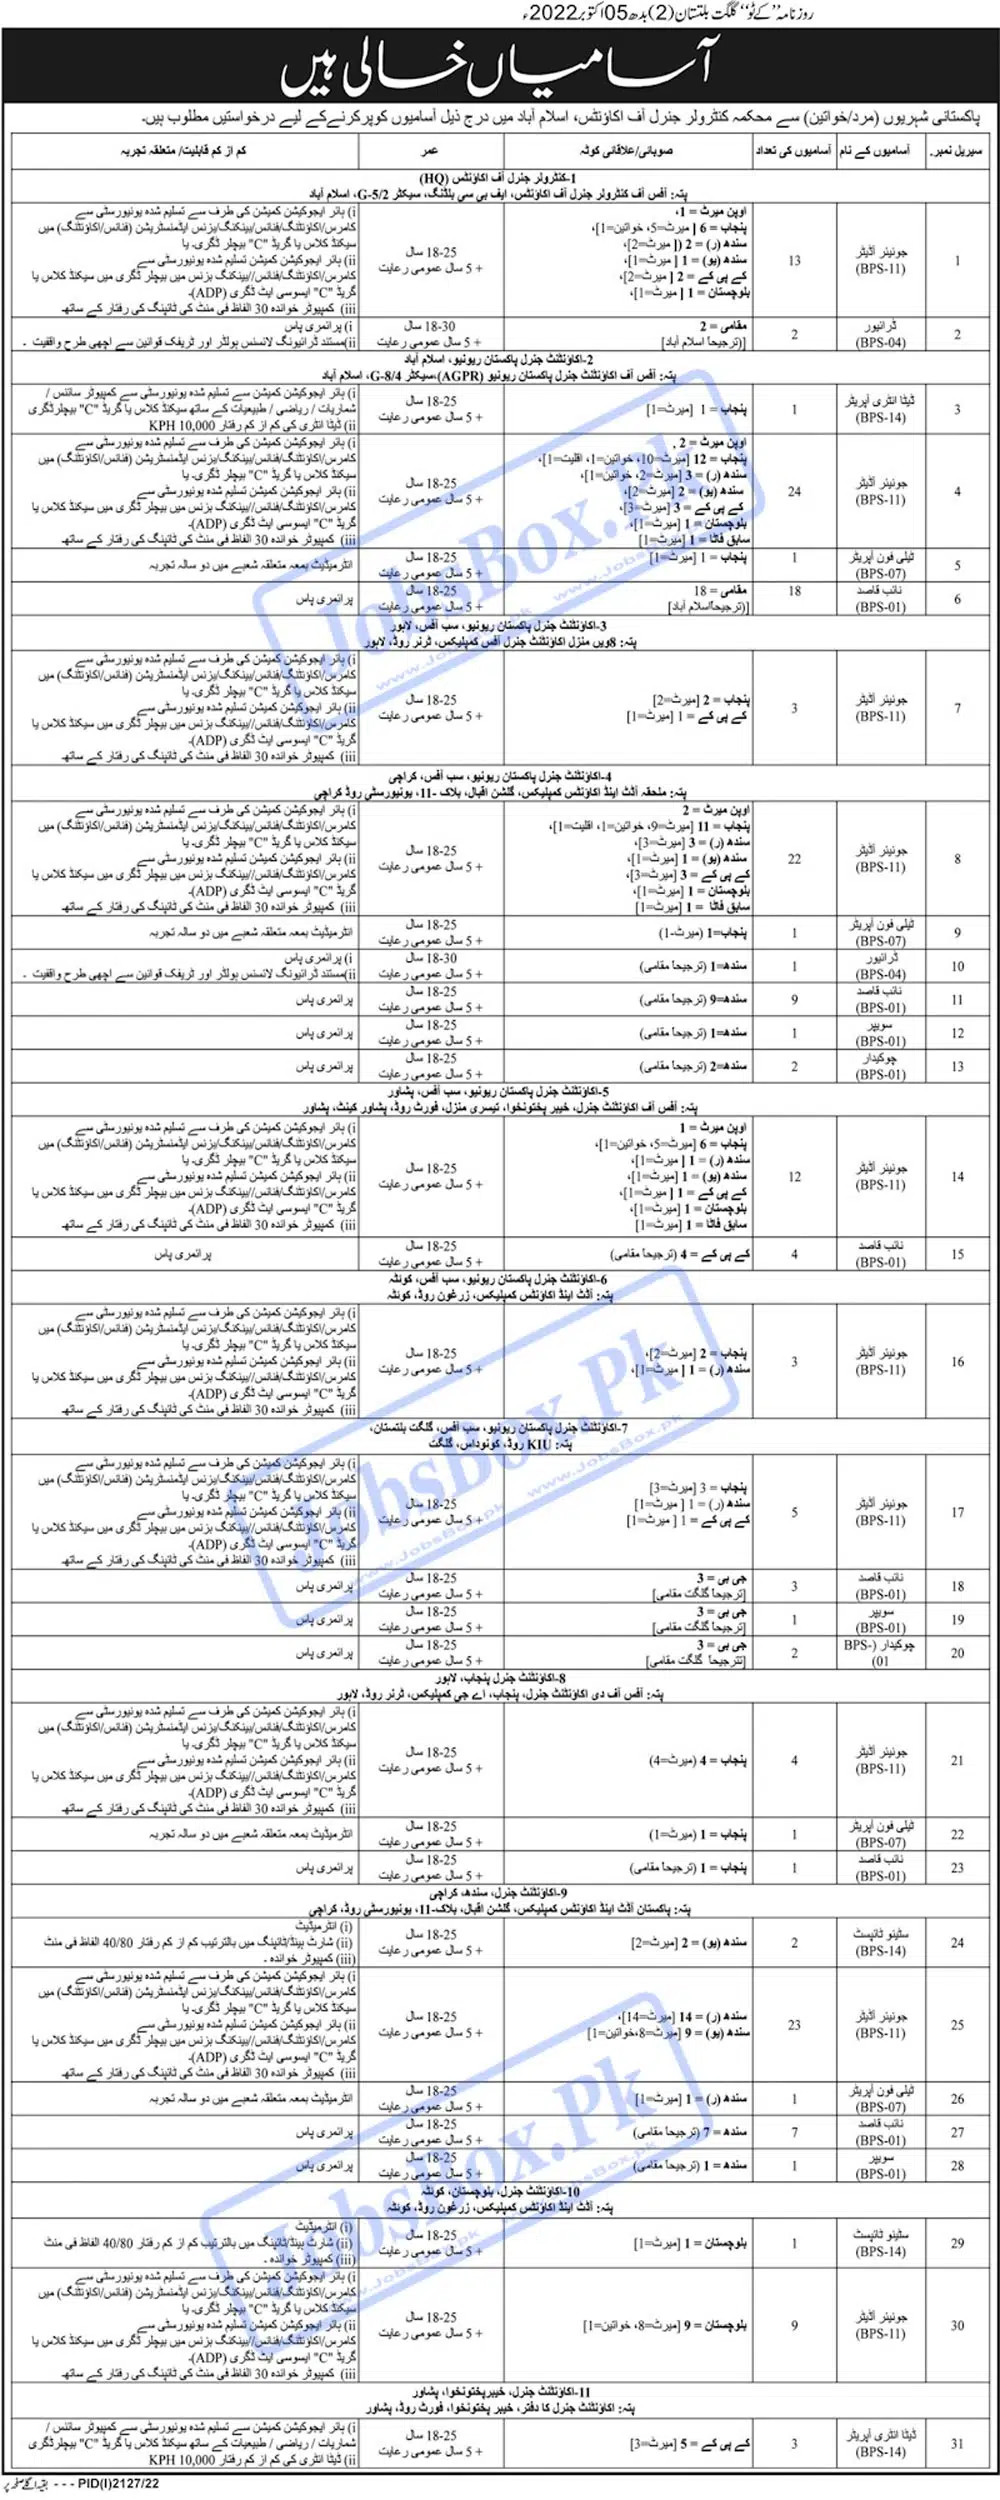 Controller General of Accounts Jobs October 2022 - Form Available at www.cga.gov.pk